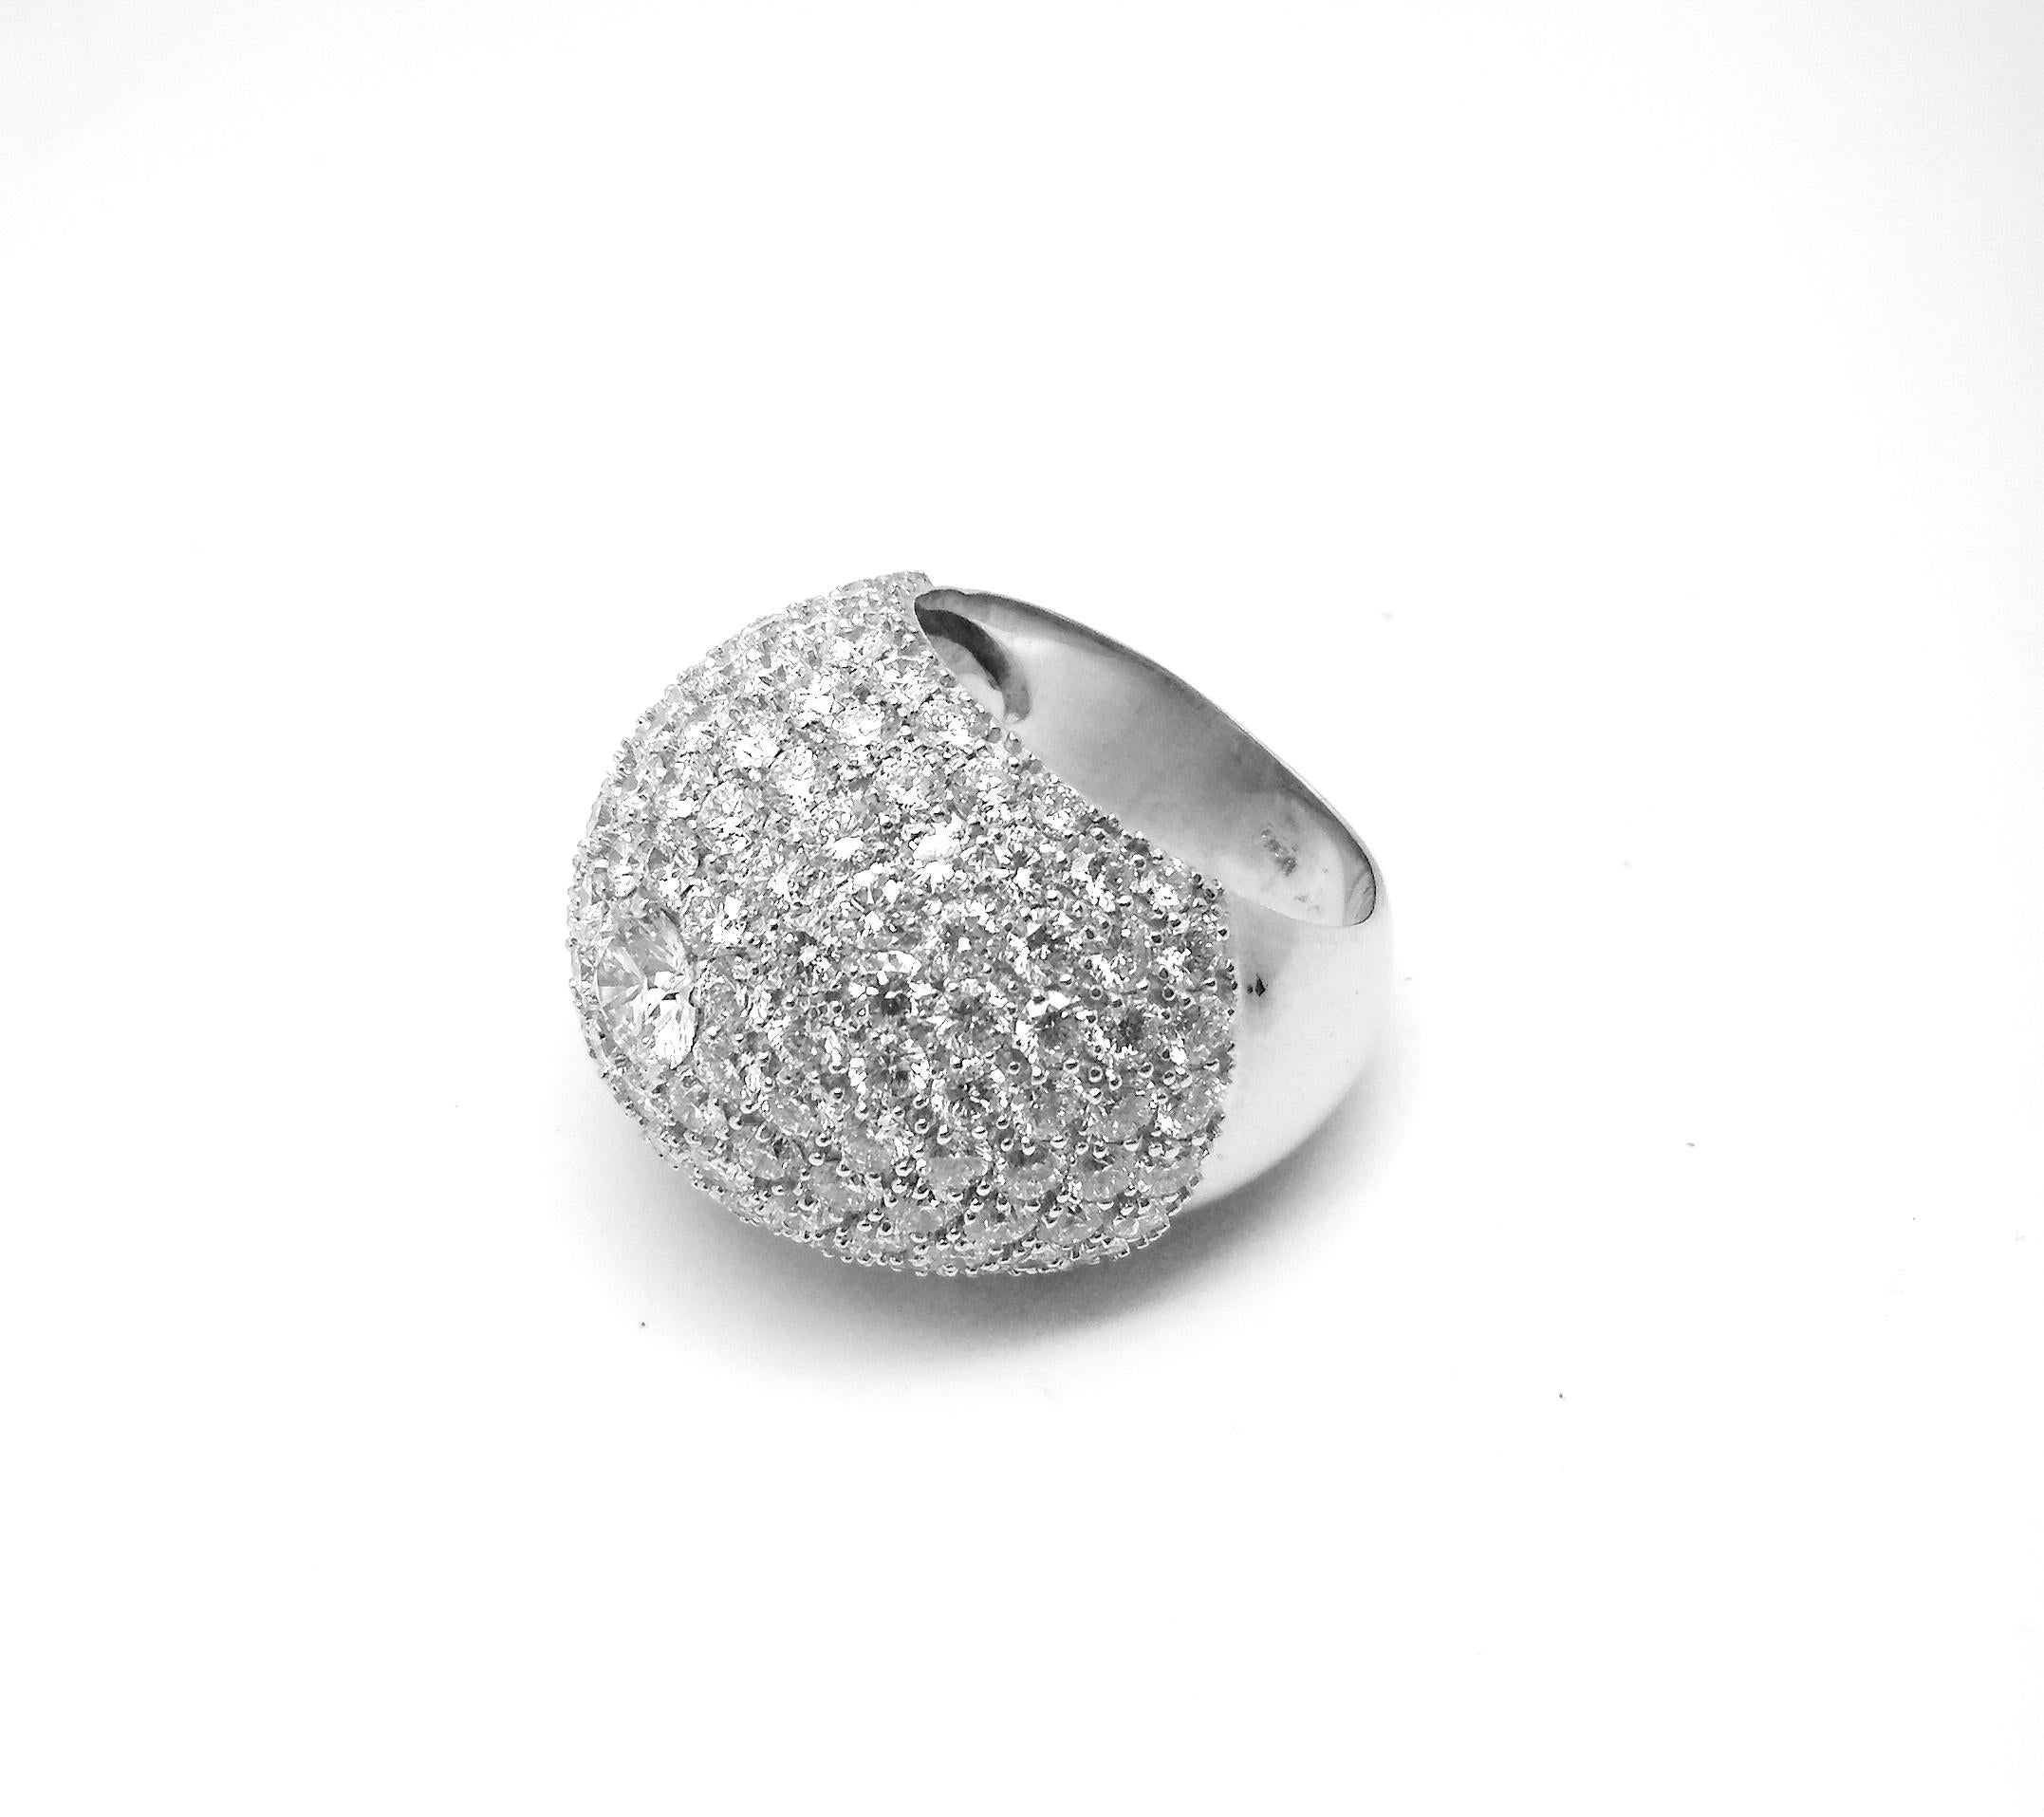 S.Georgios designer 18 Karat White Gold pave Brilliant Cut White Diamond Wide Dome Ring is all handmade in a unique dome design. The gorgeous ring features a central brilliant-cut white diamond VS2 Color G total weight of 0.56 Carat and